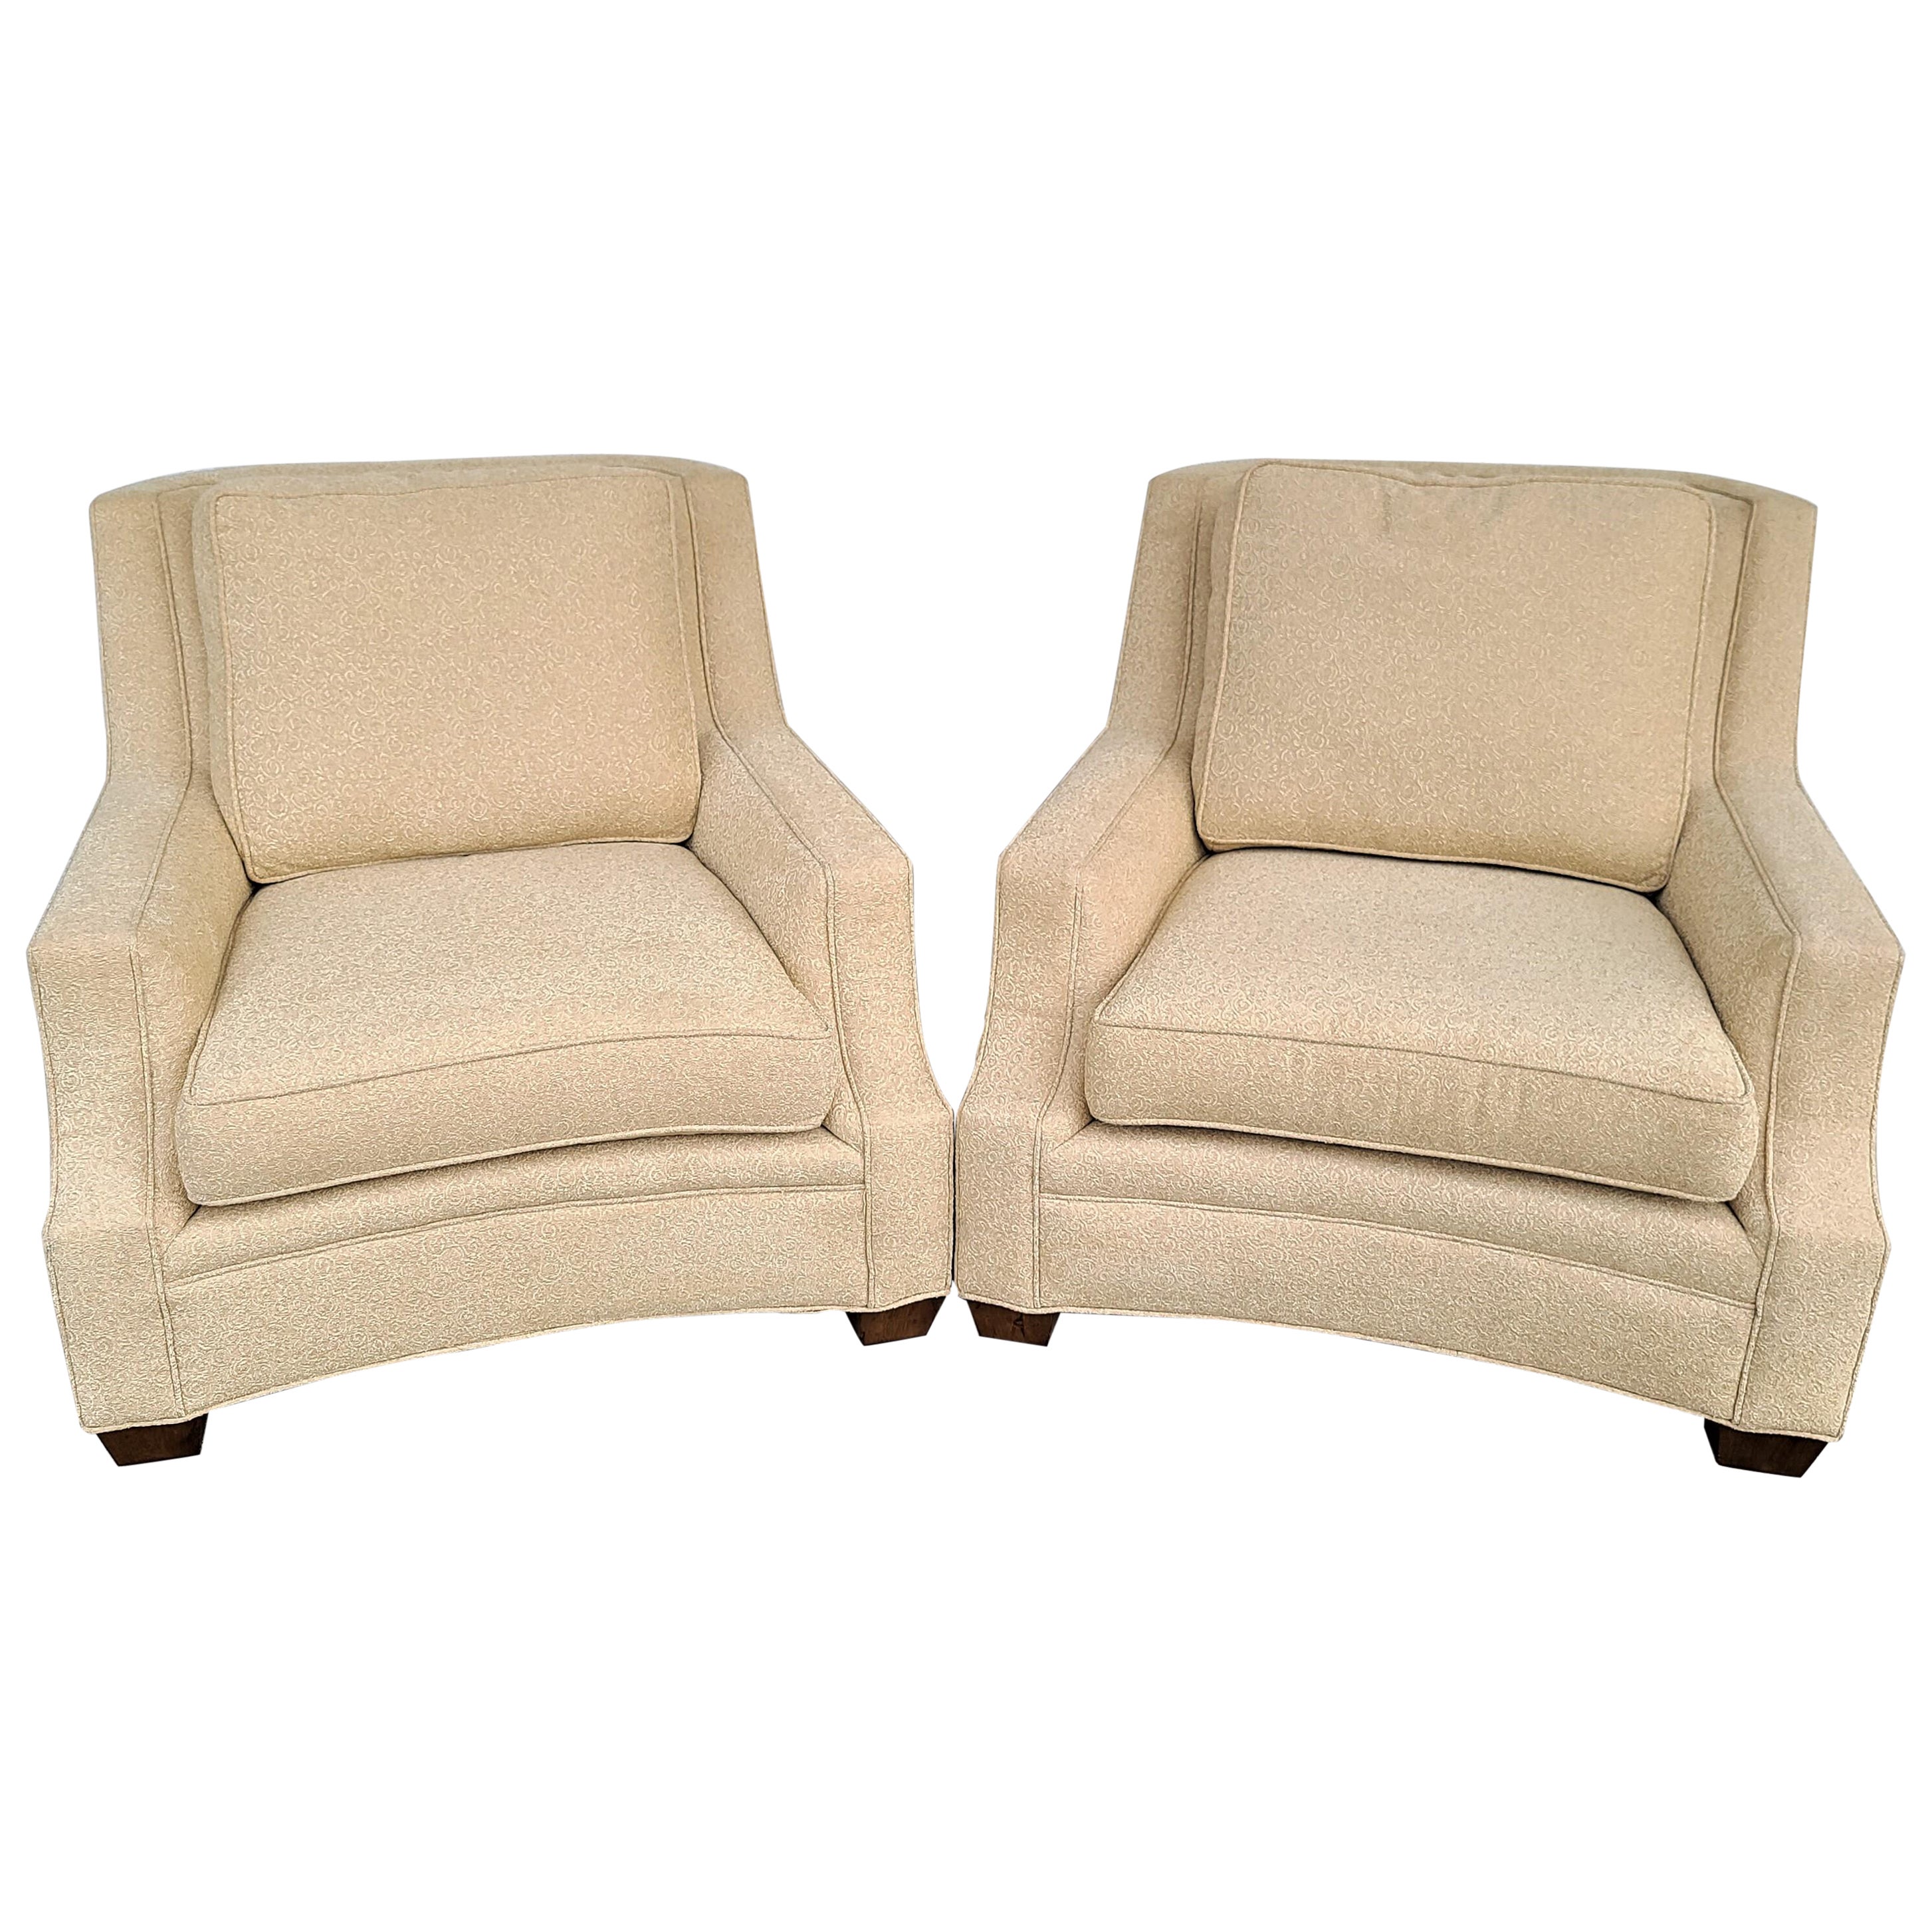 Oversized Beige Lounge Chairs by Century Furniture Co - A Pair For Sale